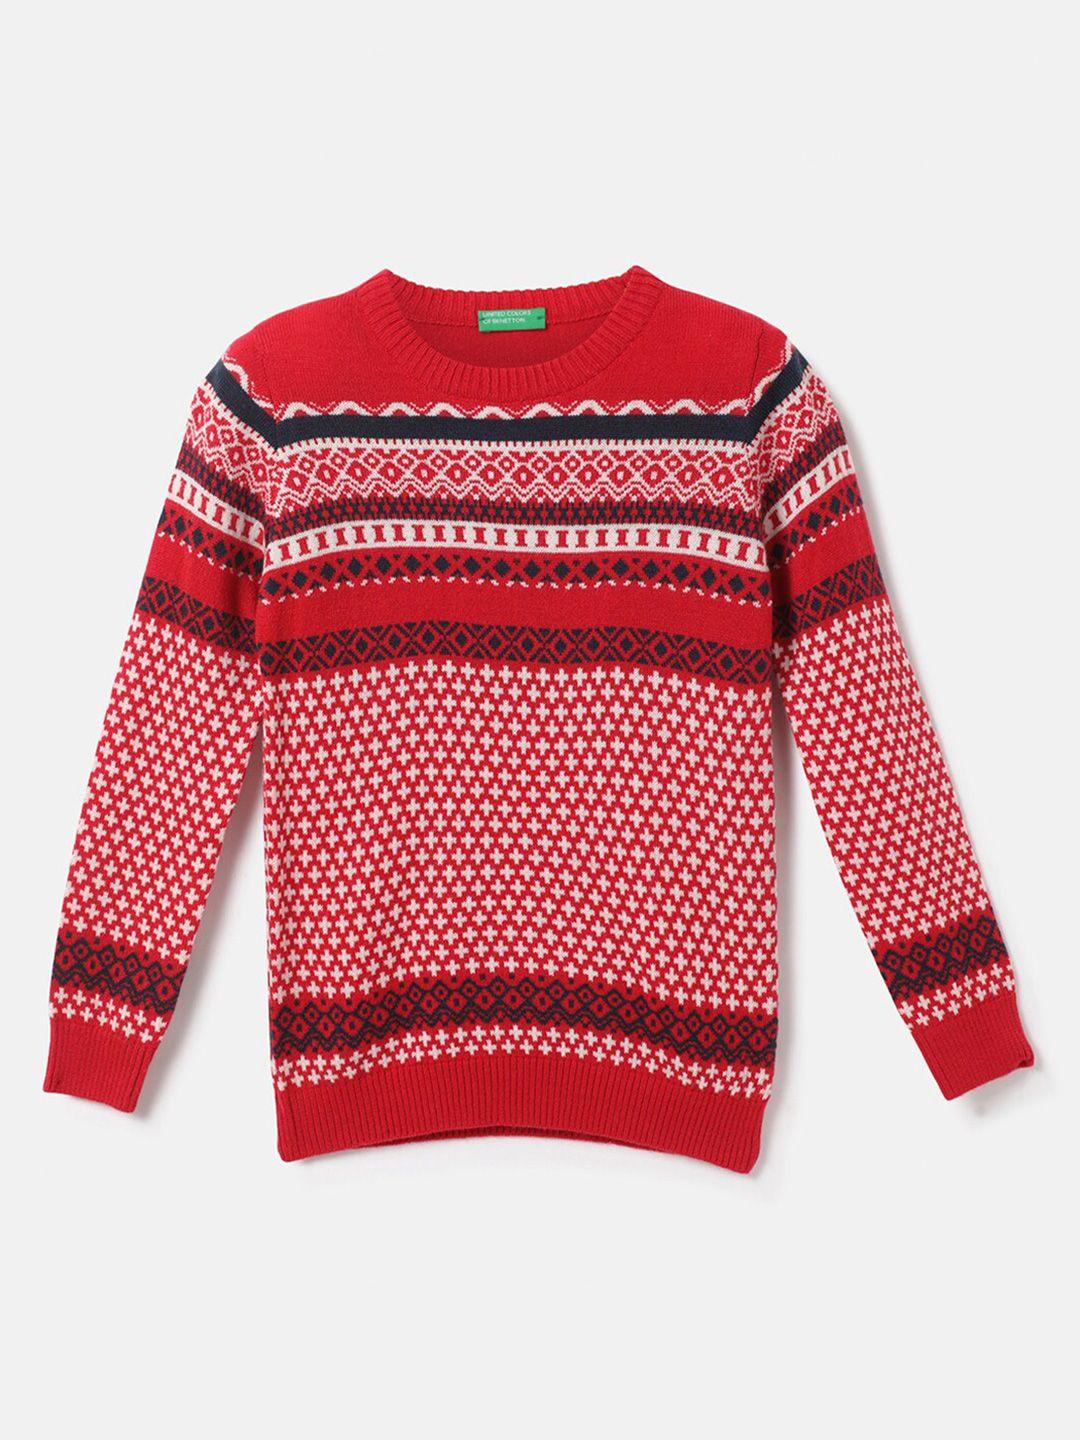 United Colors of Benetton Boys Red & White Printed Pullover